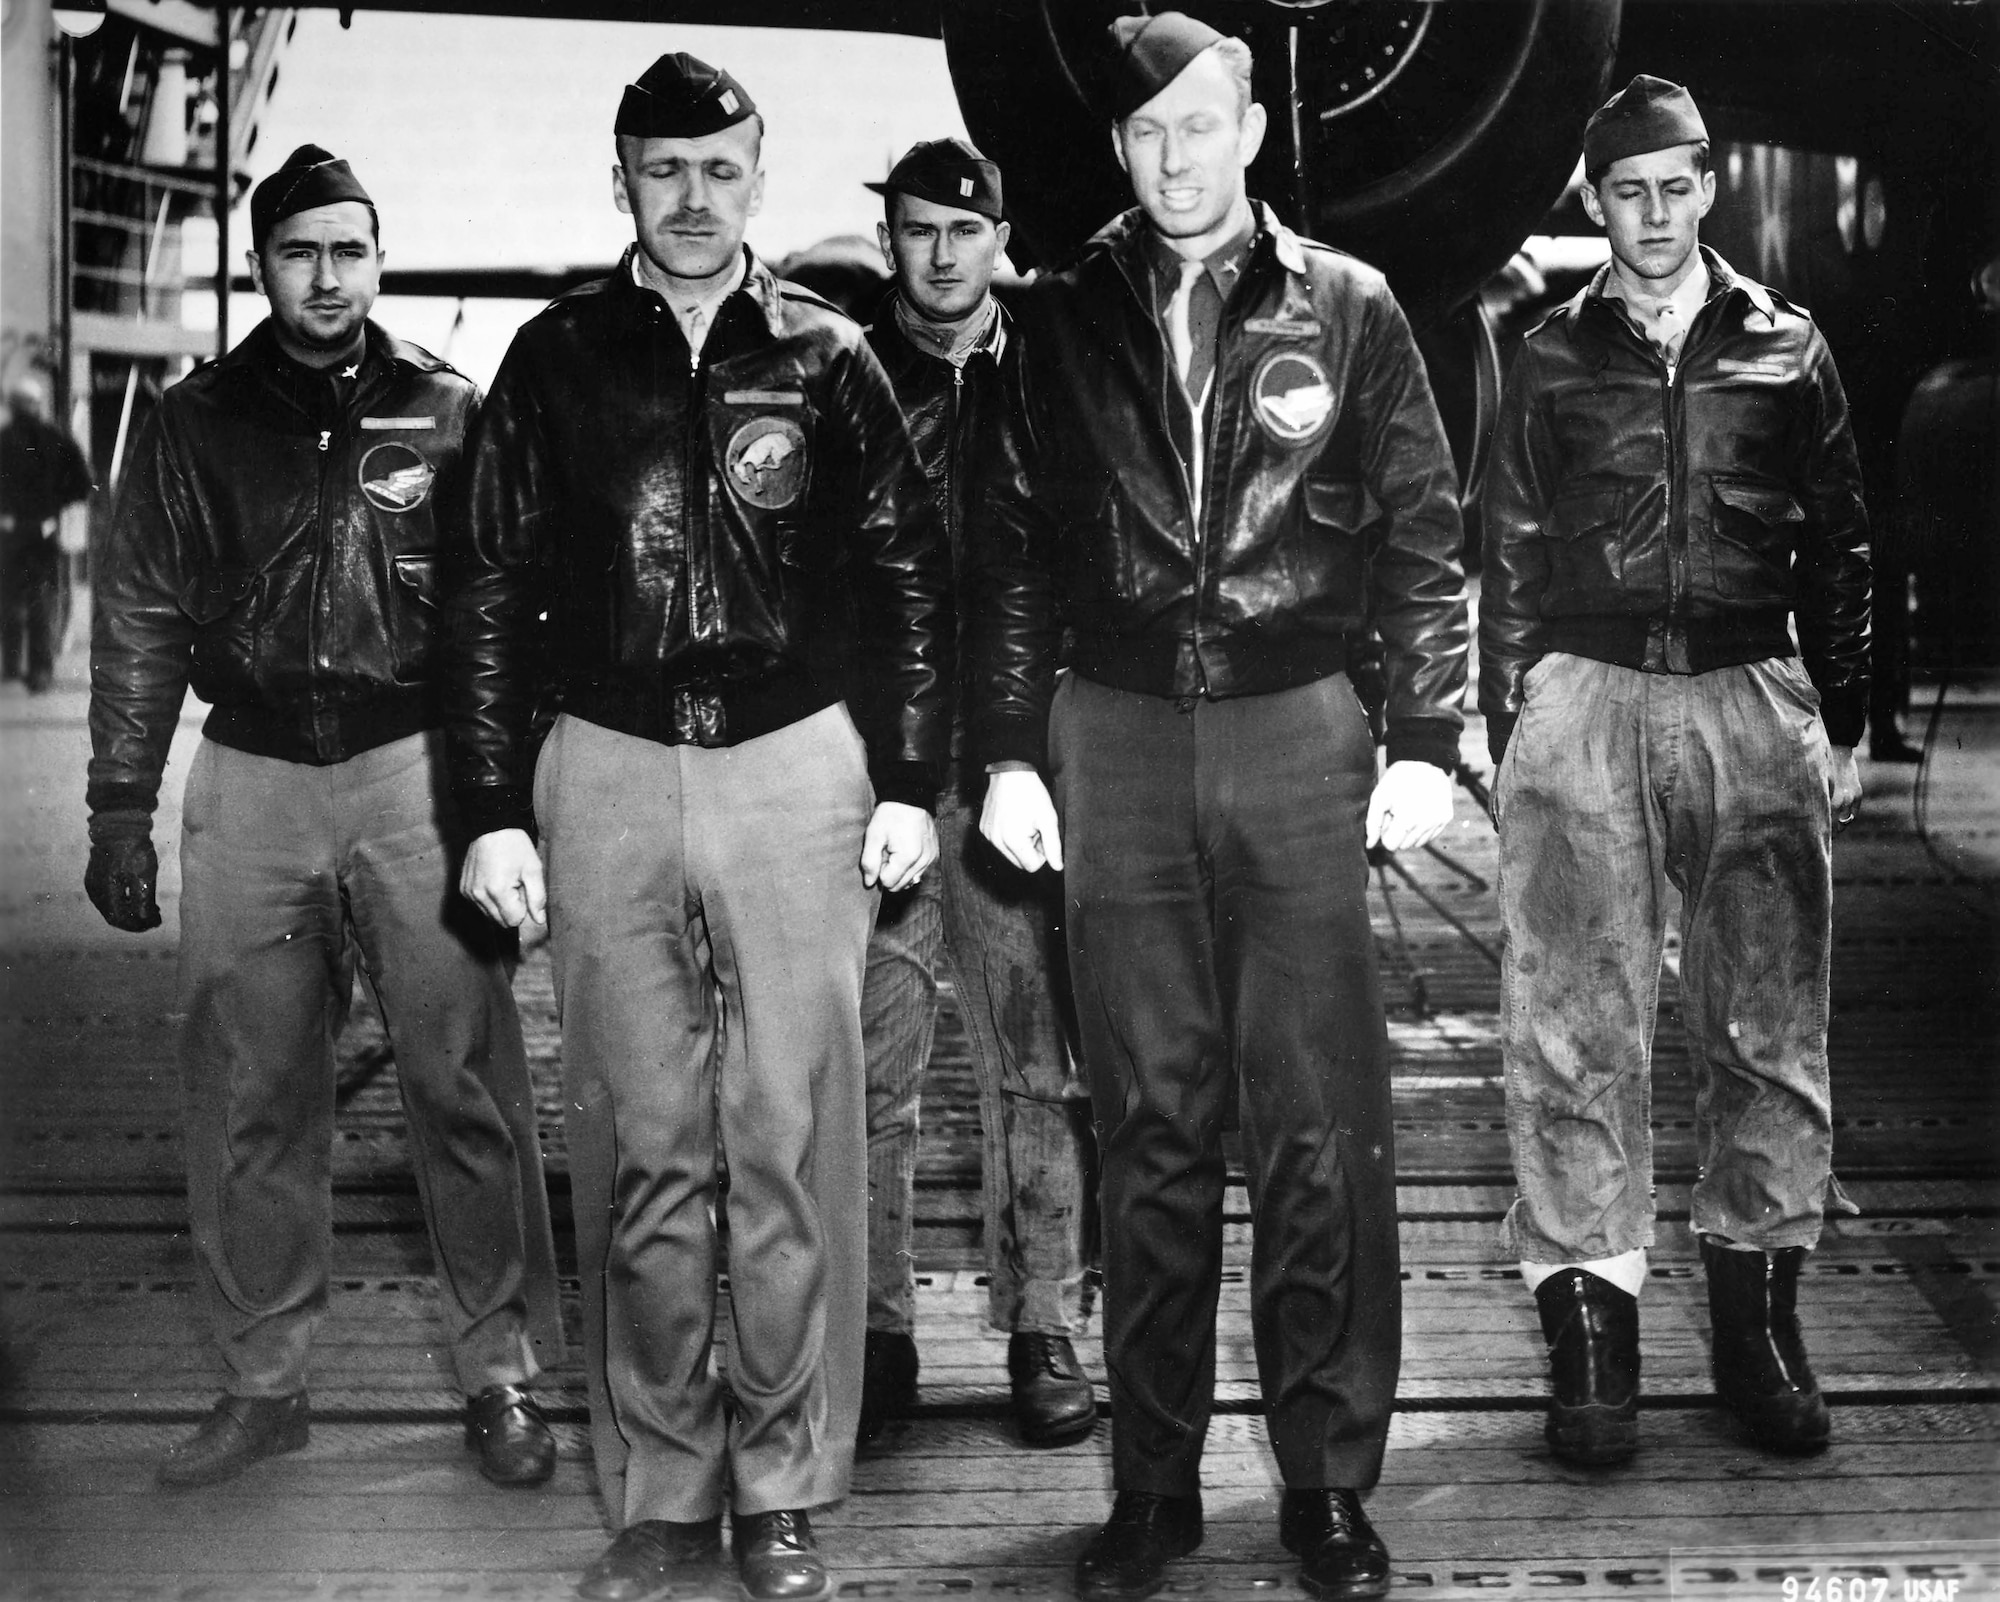 Crew 8, the York Crew, in a crew picture taken aboard USS Hornet (CV-8) enroute to Japan in April, 1942.  Left to right are Lt. Nolan A. Herndon, Navigator; Lt. Robert G. Emmens, Co-pilot; S/Sgt Theodore H. Laban, Bombardier; Capt. Edward J. York, Pilot and Sgt. David W. Pohl, Flight Engineer/Gunner.  (Children of the Doolittle Raiders.com)